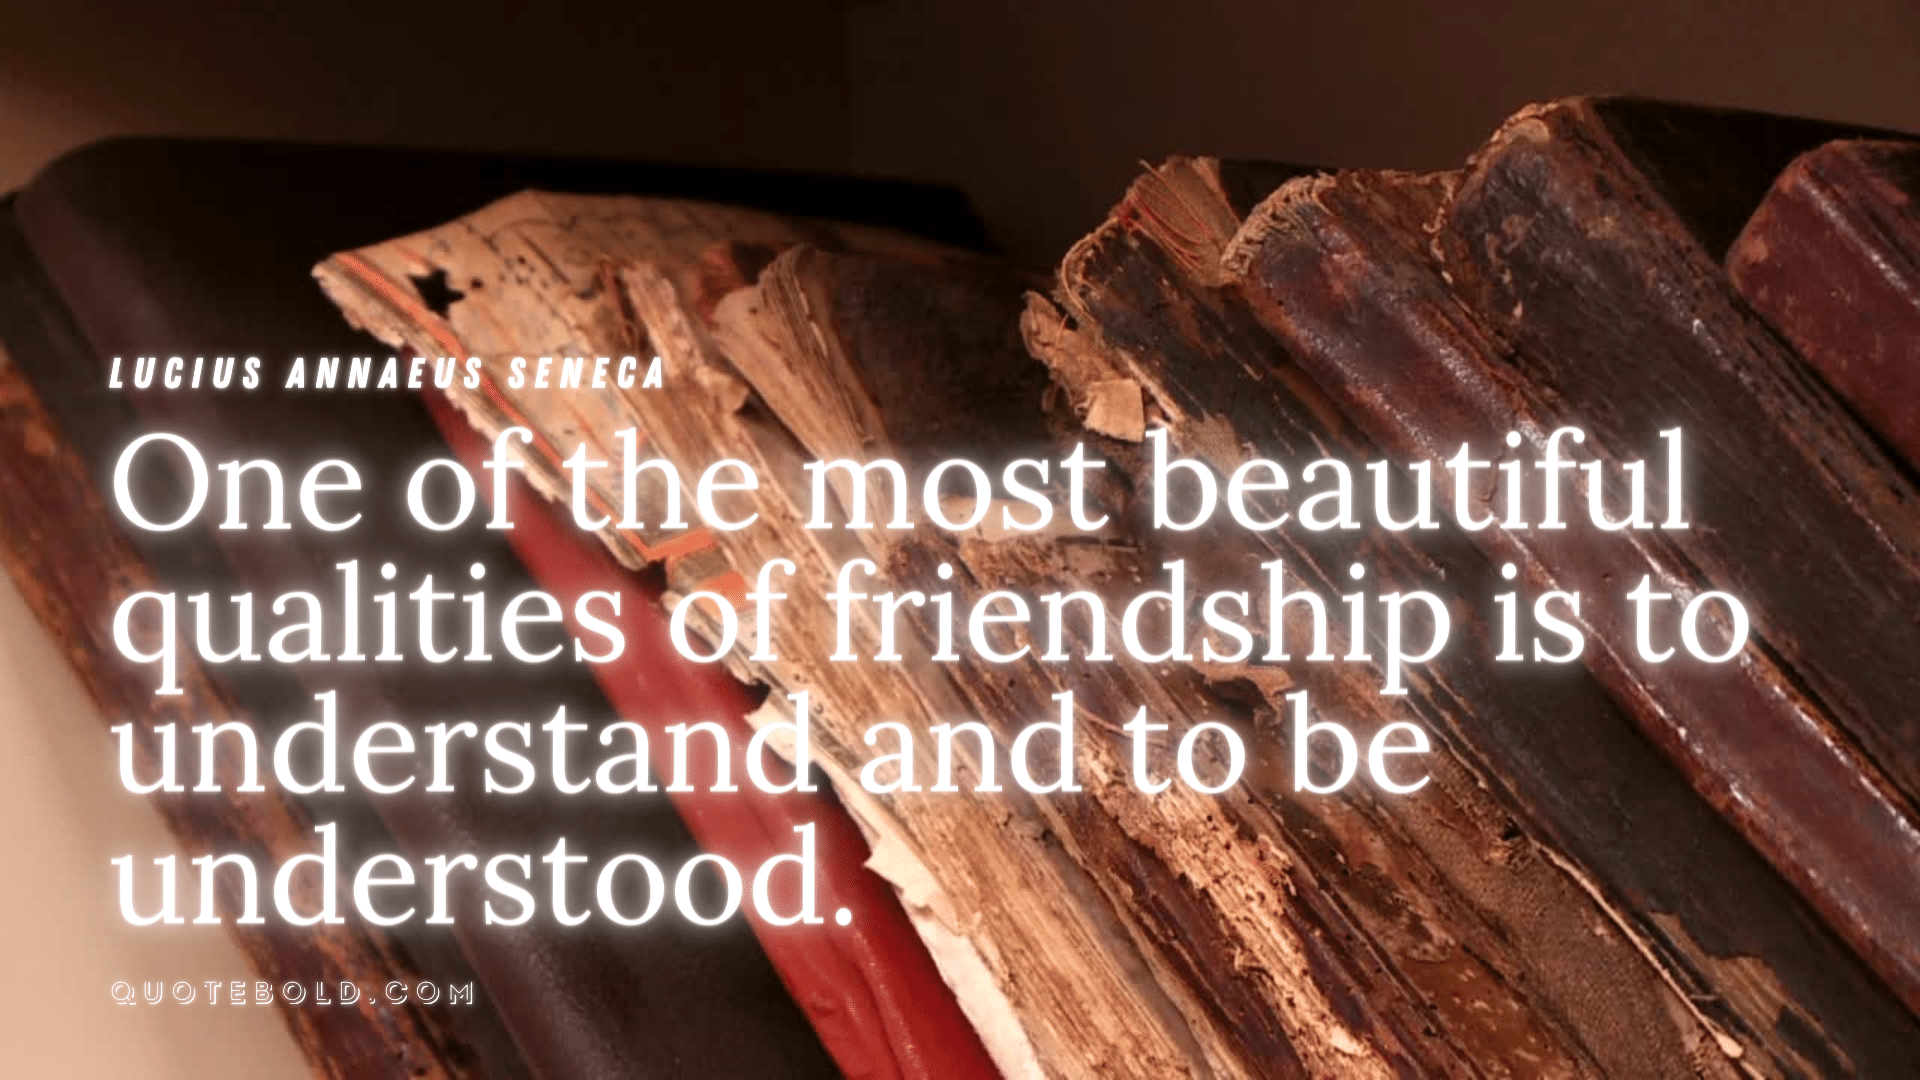 40+ Unforgettable Moments with Friends Quotes [Images] - QuoteBold